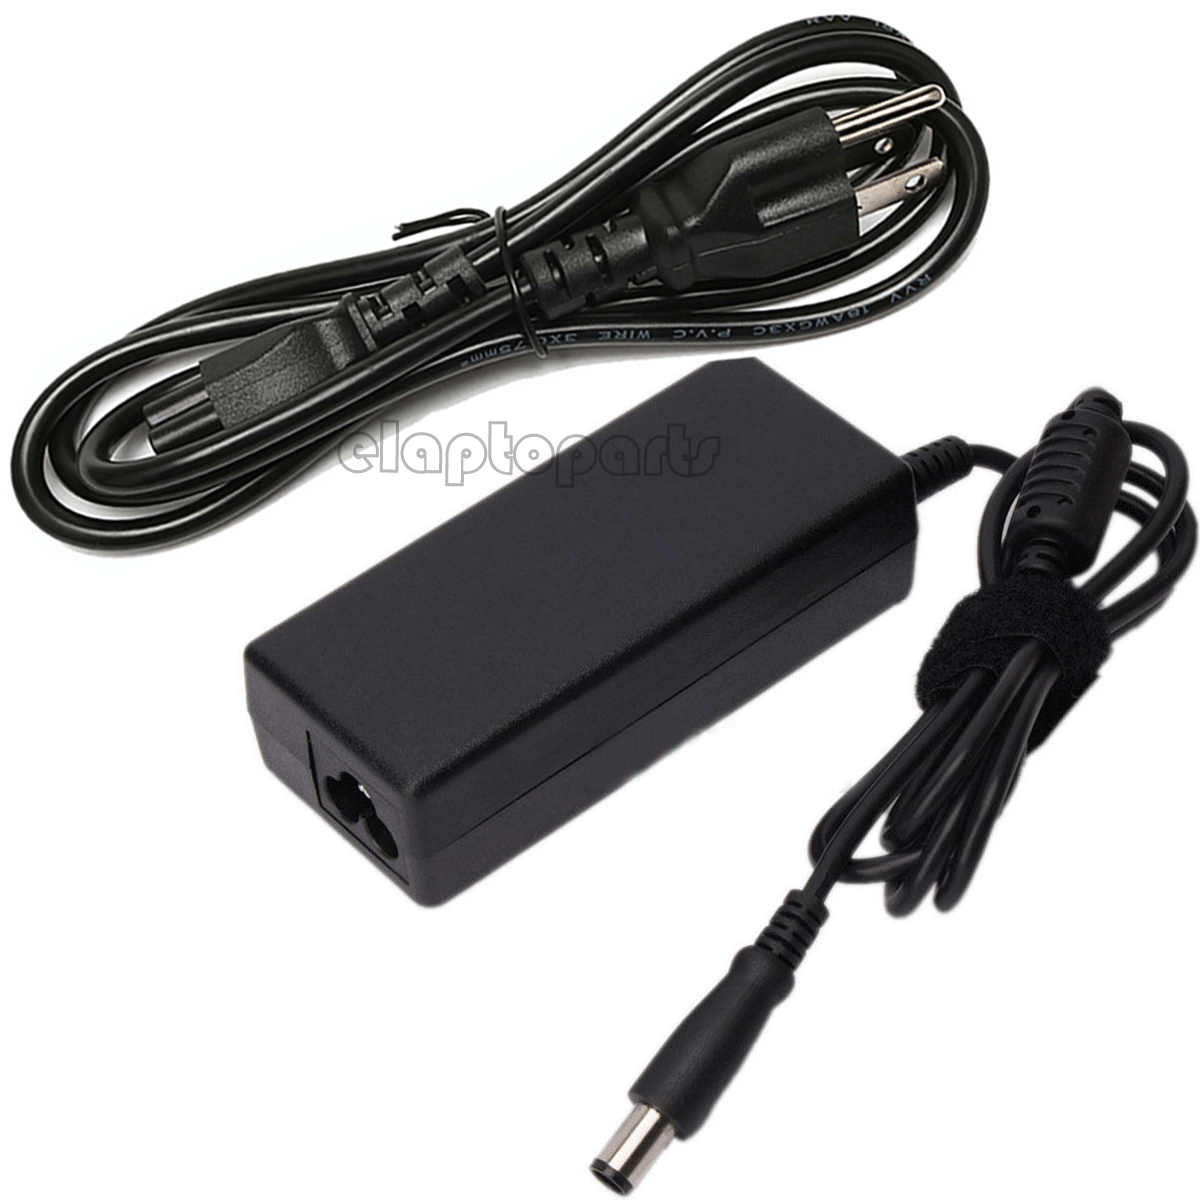 28V AC Adapter For HD-2800200 OPI LED LAMP 2017 GL902 GL 902 Nail Light Charger Compatible Brand For OPI Power Supply A